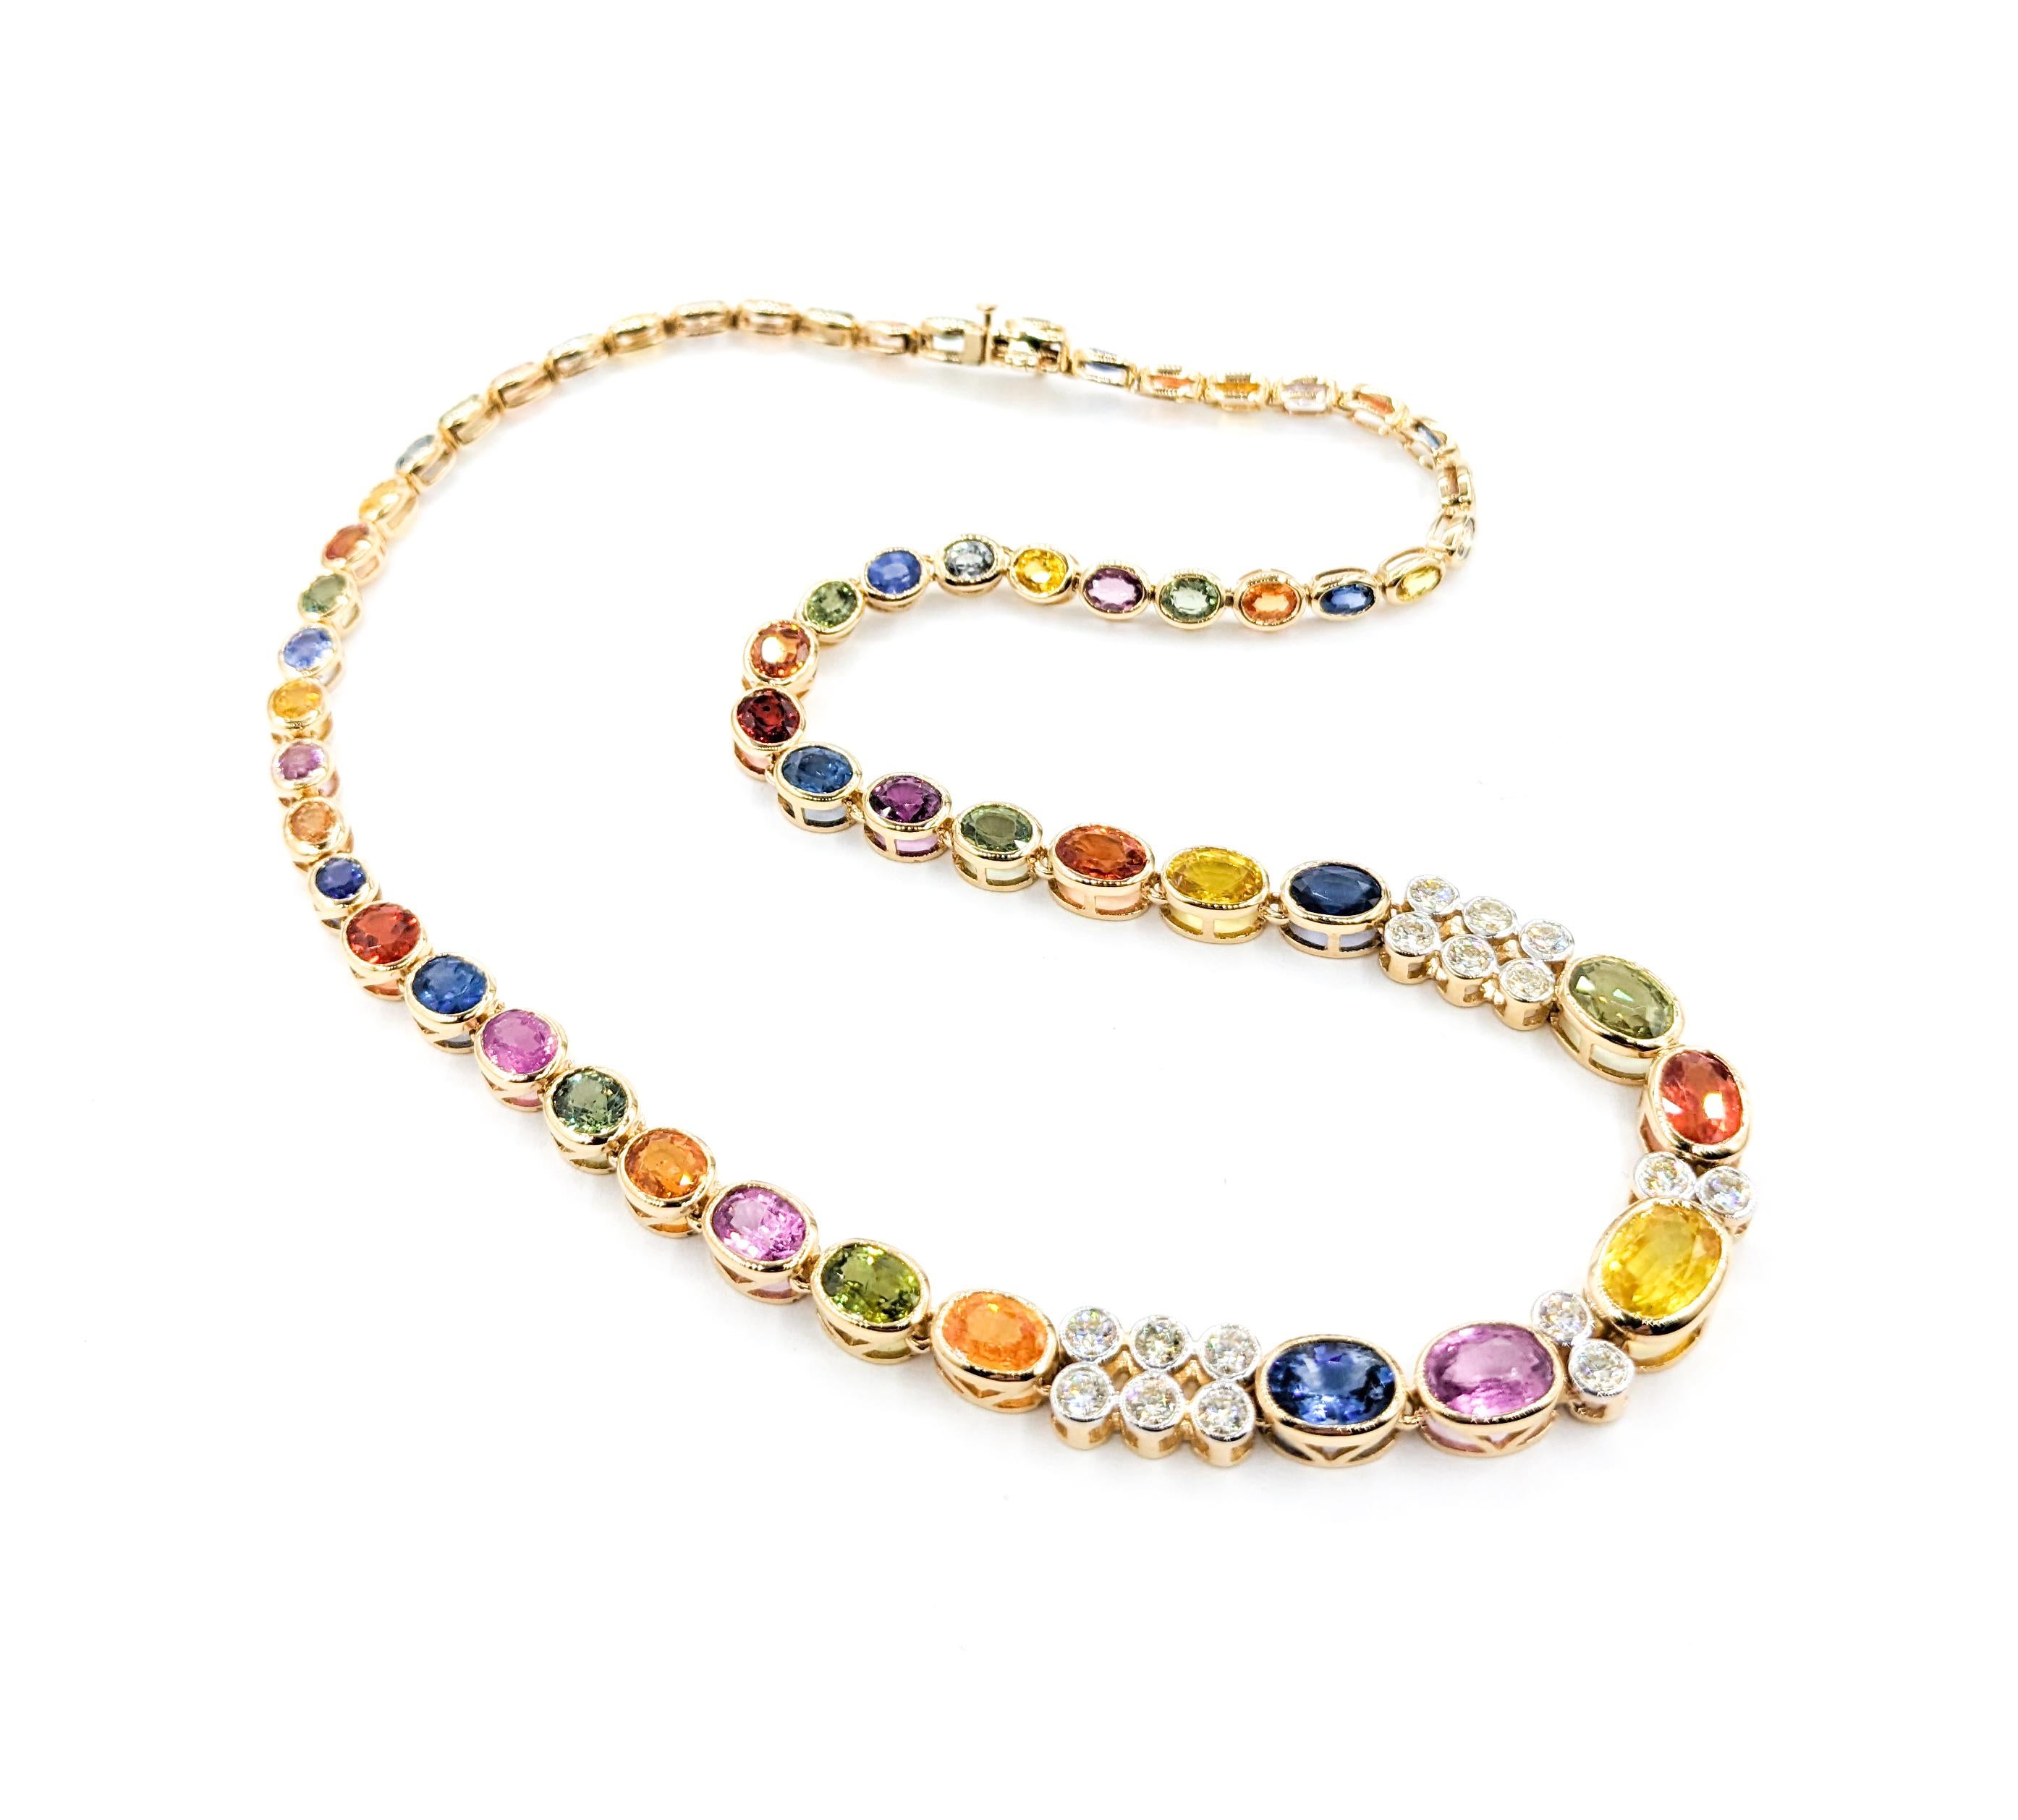 36.02ctw of Multi-Colored Sapphires & 1.89ctw Diamond Necklace In Yellow Gold

Introducing an exquisite Gemstone Fashion Necklace for women, masterfully crafted in 14kt Yellow Gold. This stunning piece is a perfect blend of luxury and style,